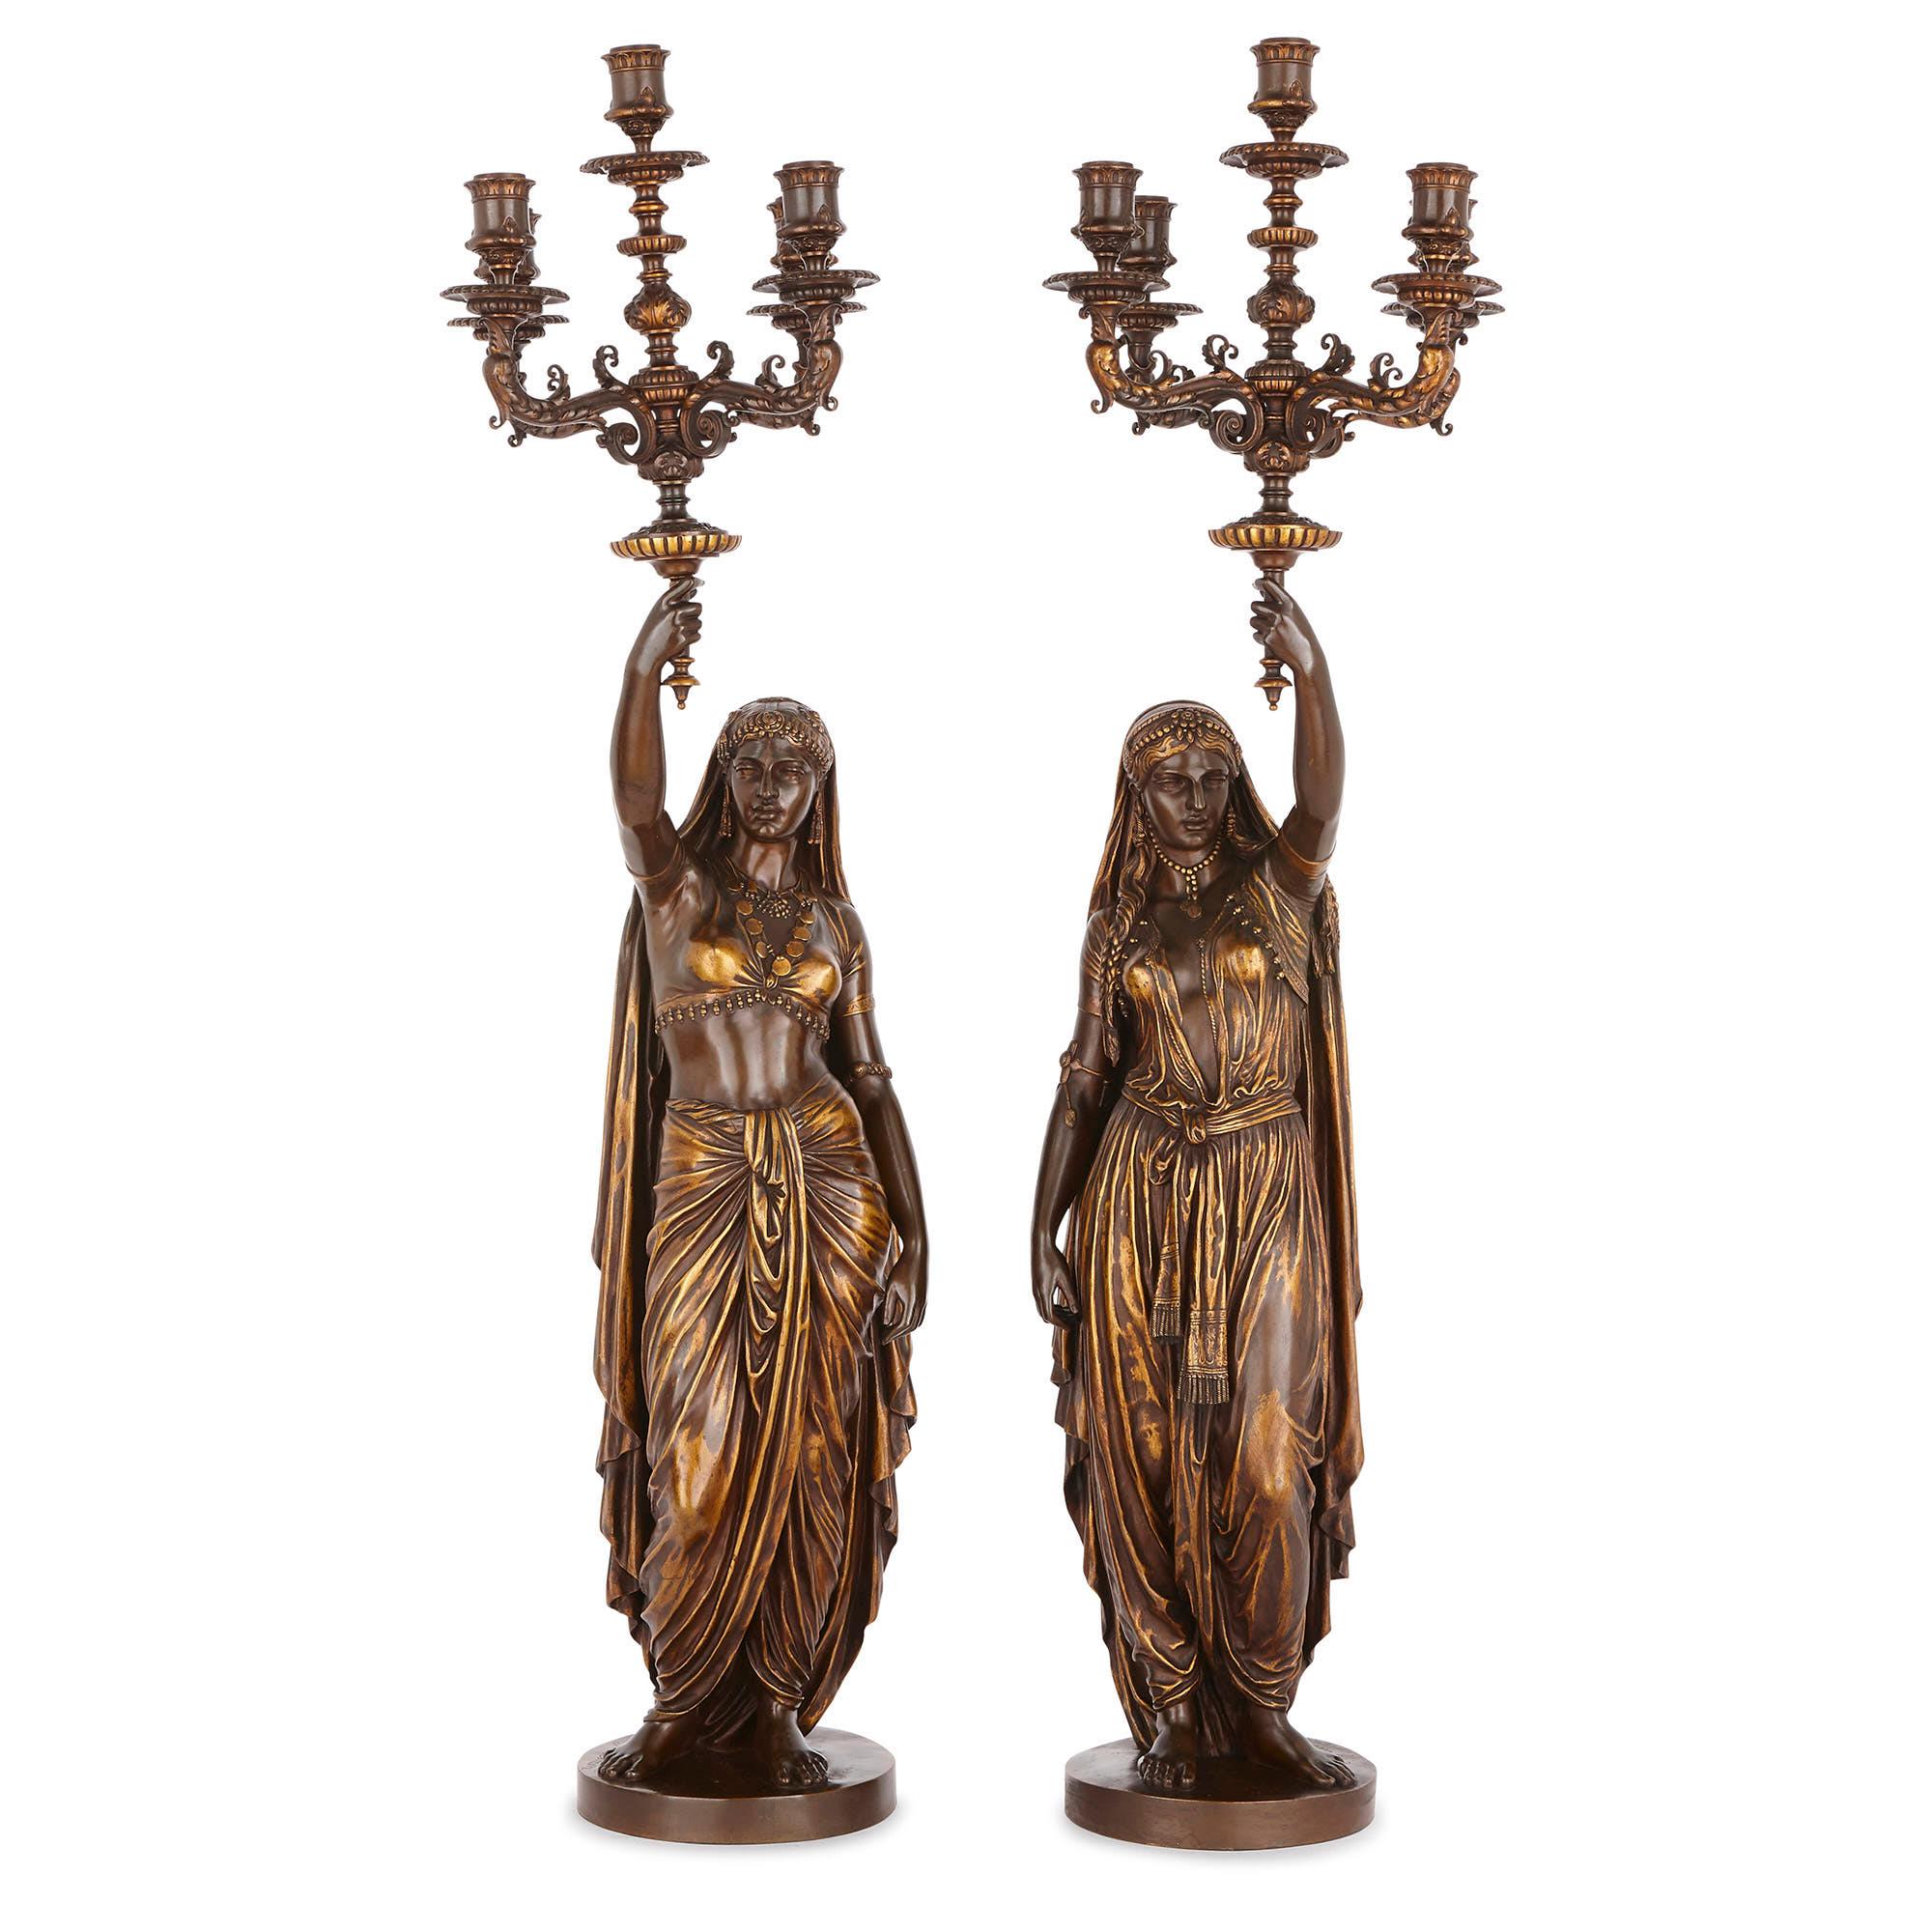 Émile Coriolan Hippolyte Guillemin, the famous French sculptor, designed these exquisite bronze figural torchères in circa 1880. Guillemin was an accomplished artist, who regularly exhibited at the Salon in Paris from the 1870s-1890s. Indeed,